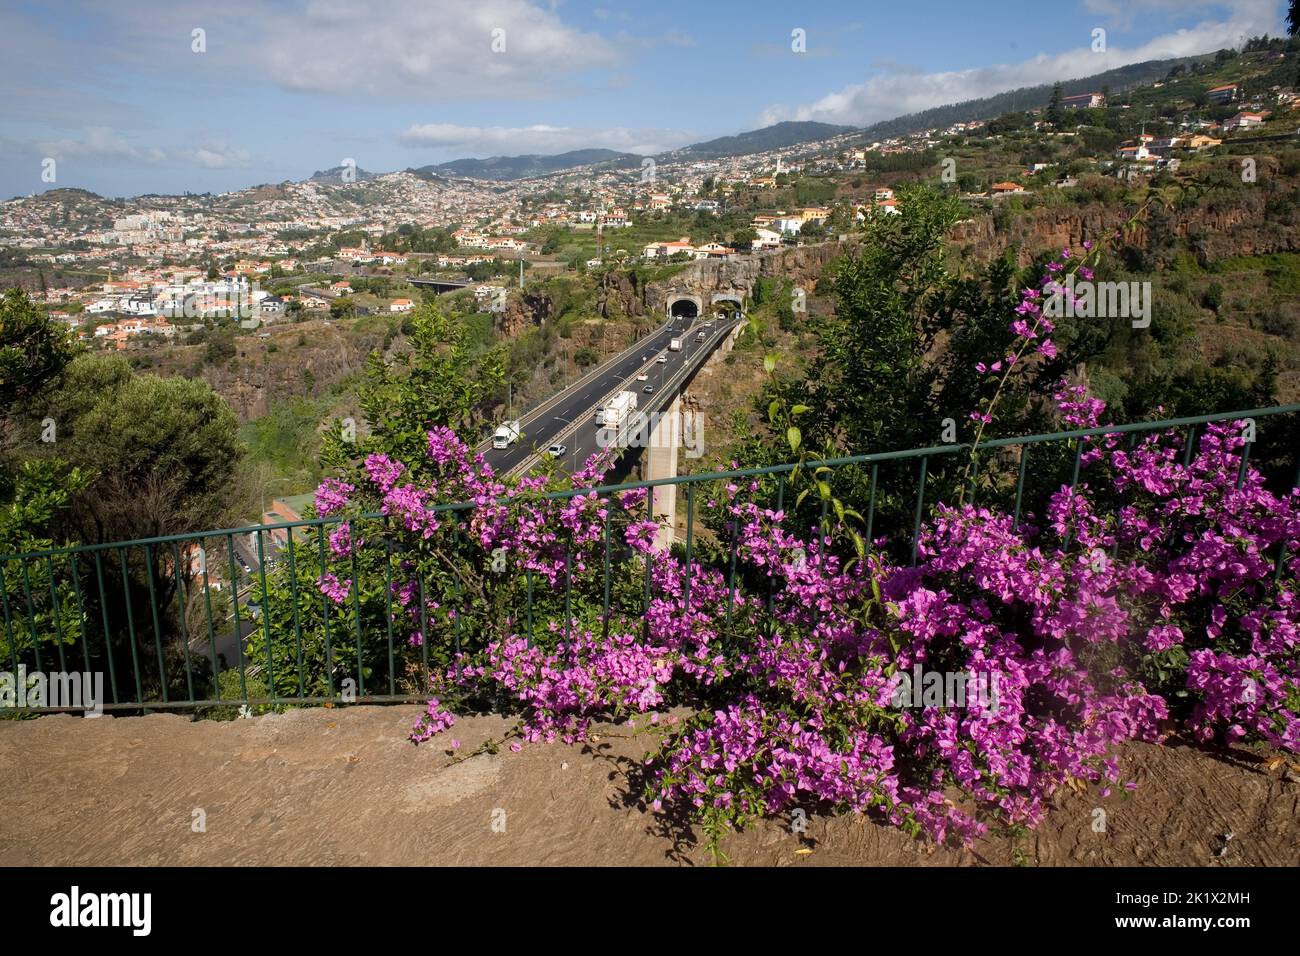 viewpoint in botanical gardens with flowers, VR1 road and Northern Funchal Madeira Stock Photo